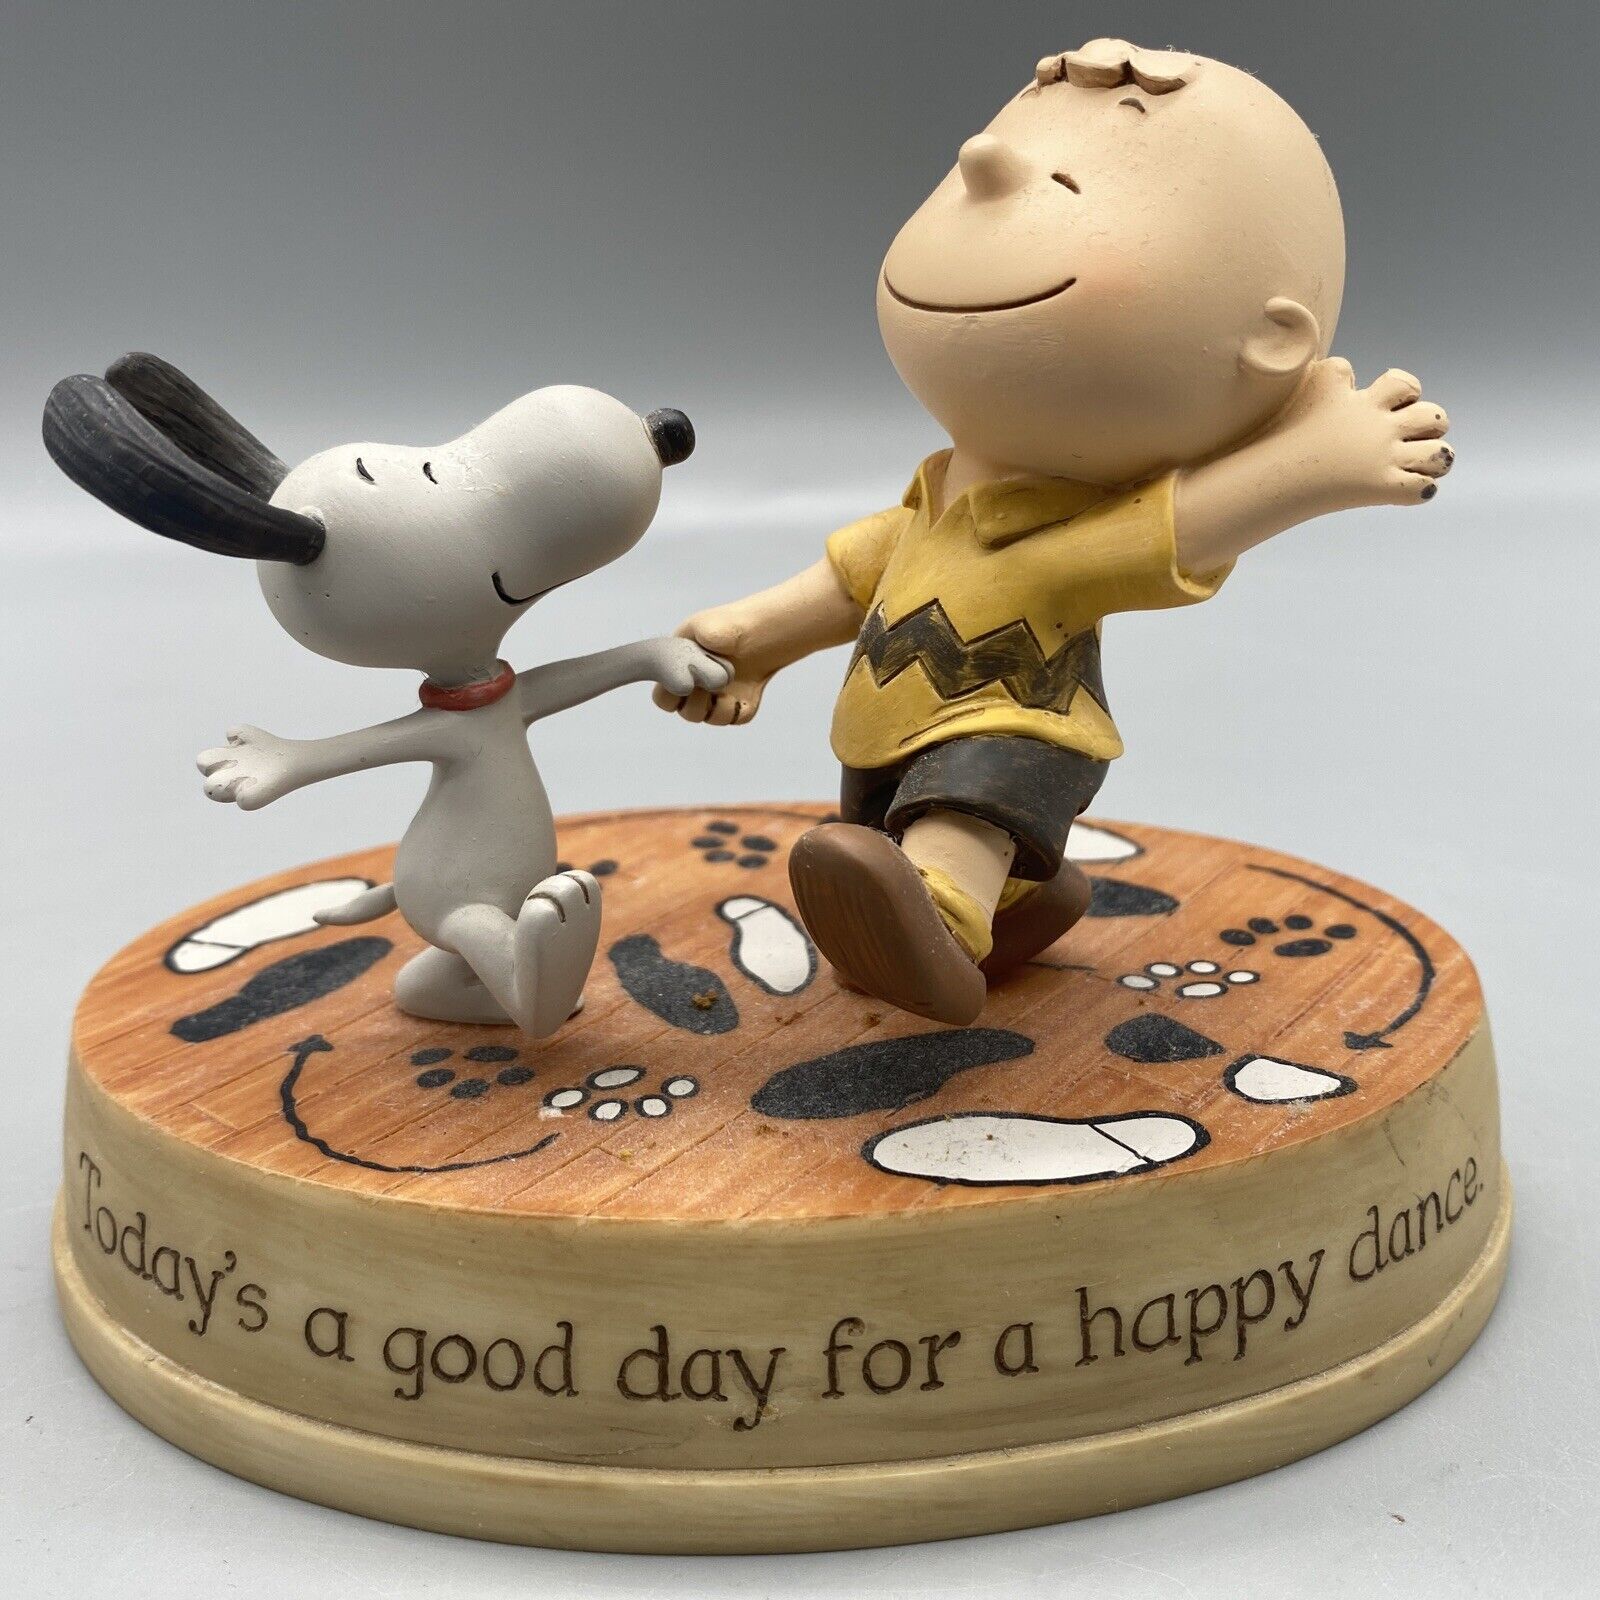 Hallmark Peanuts figurine “Today’s a good day for a happy dance” 2017 snoopy